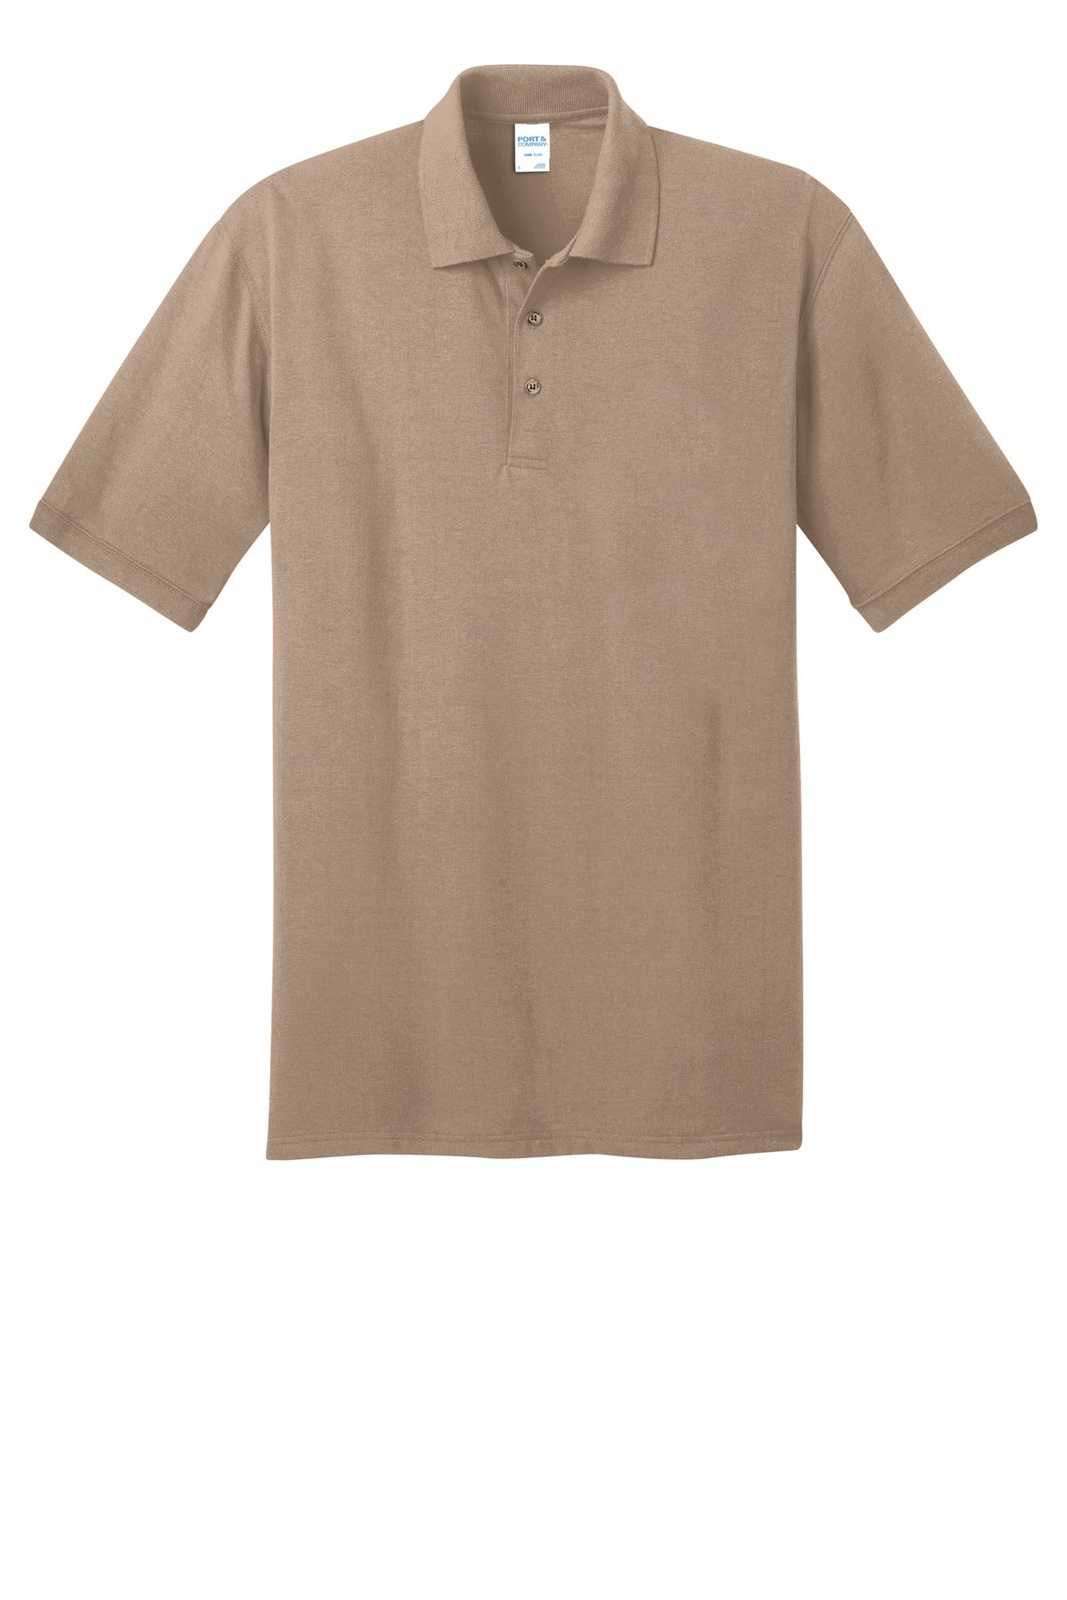 Port & Company KP55T Tall Core Blend Jersey Knit Polo - Sand - HIT a Double - 1